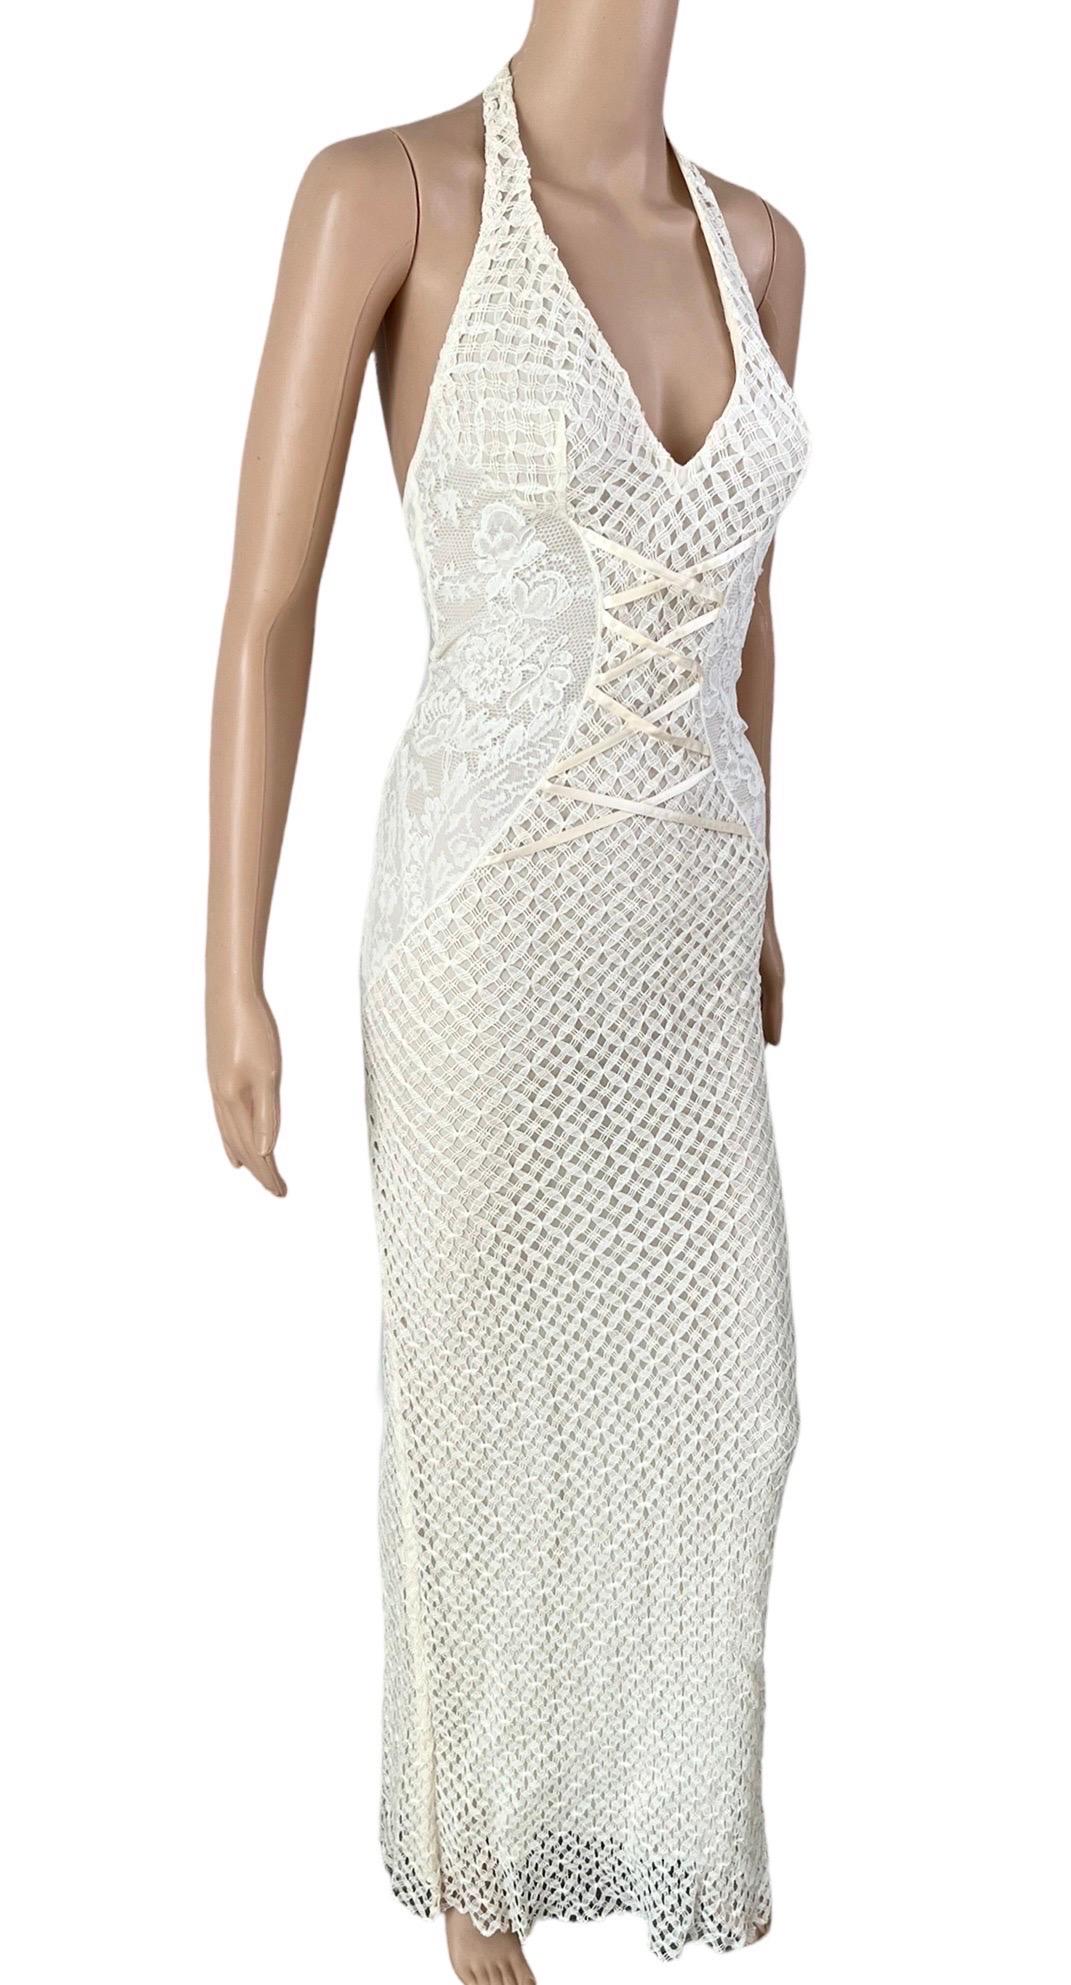 Gianni Versace S/S 2002 Plunging Backless Semi Sheer Lace Knit Ivory Dress Gown 4